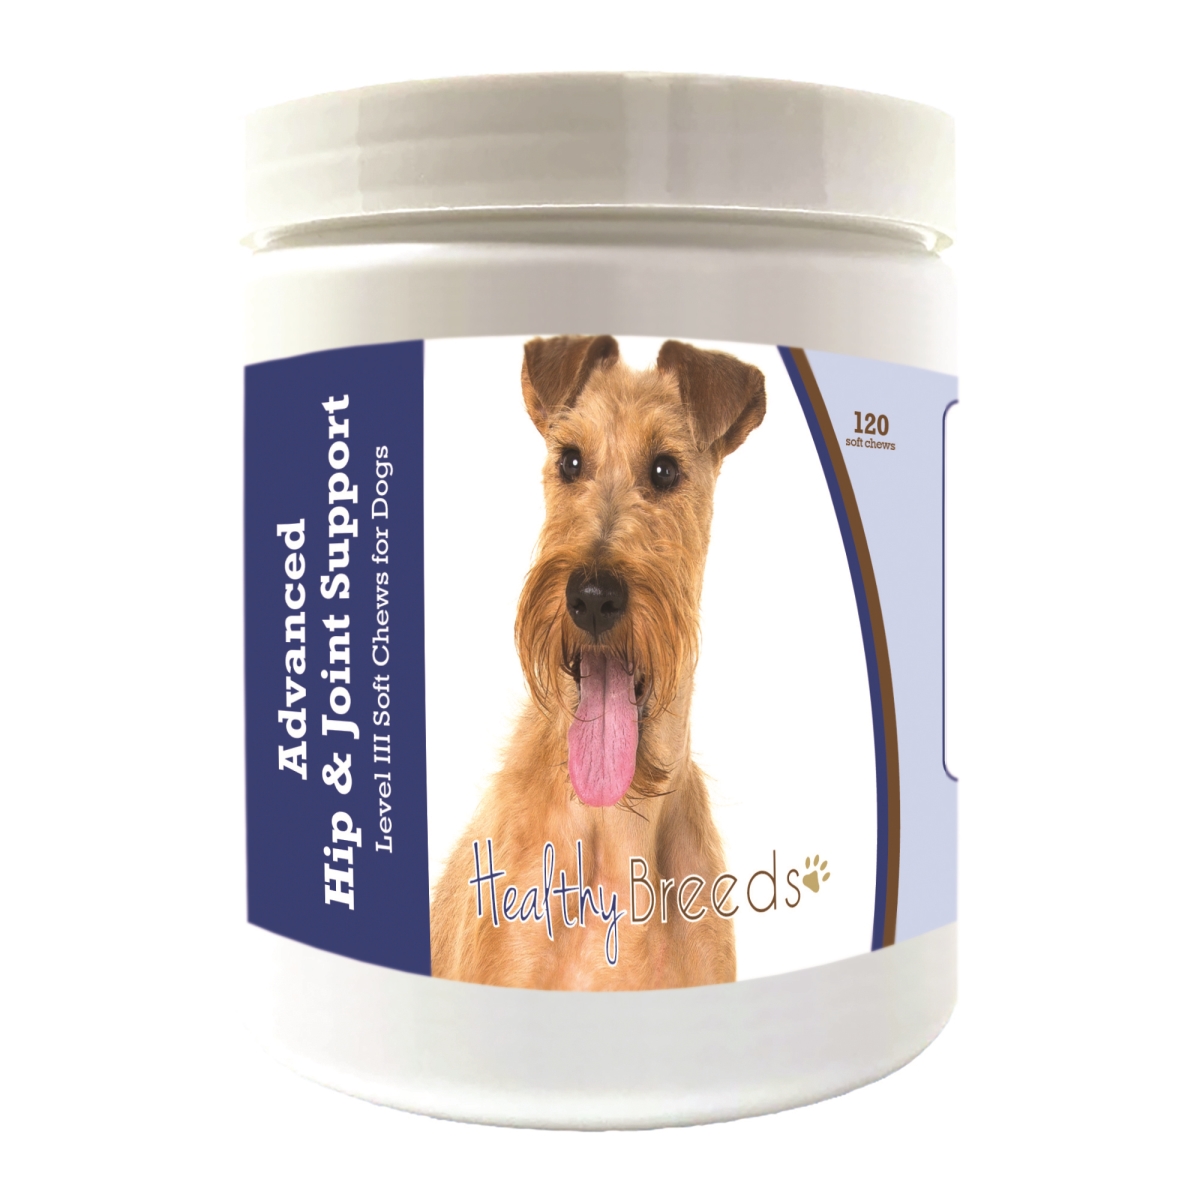 Picture of Healthy Breeds 192959898446 Irish Terrier Advanced Hip & Joint Support Level III Soft Chews for Dogs